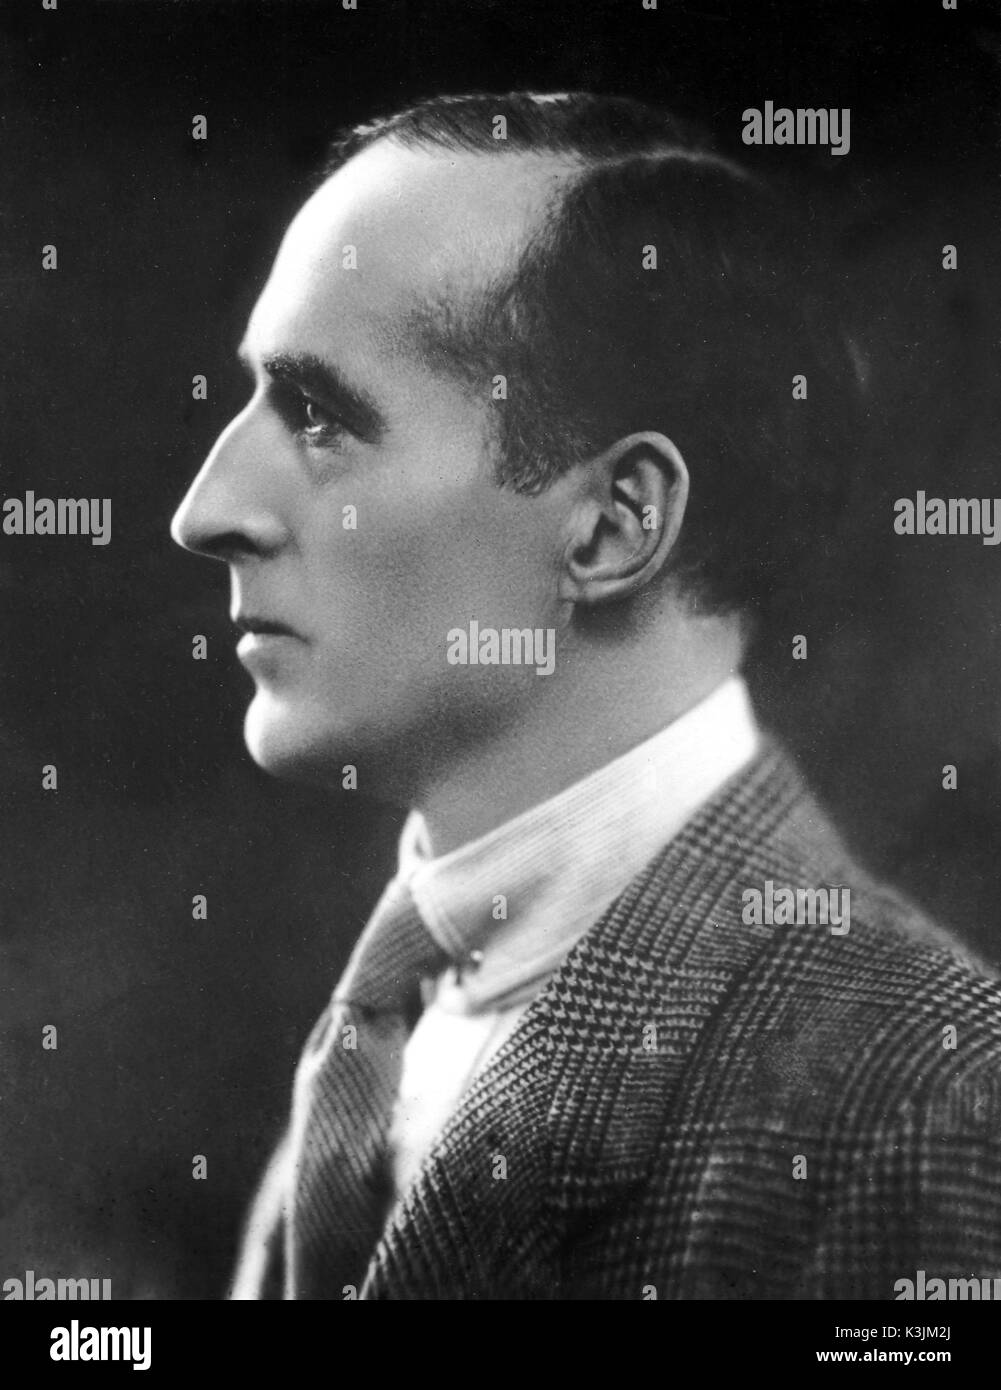 ARTHUR WONTNER British actor His resemblance to the Sidney Paget drawings in the Sherlock Holmes stories led to him playing the detective in plays and films ARTHUR WONTNER Stock Photo